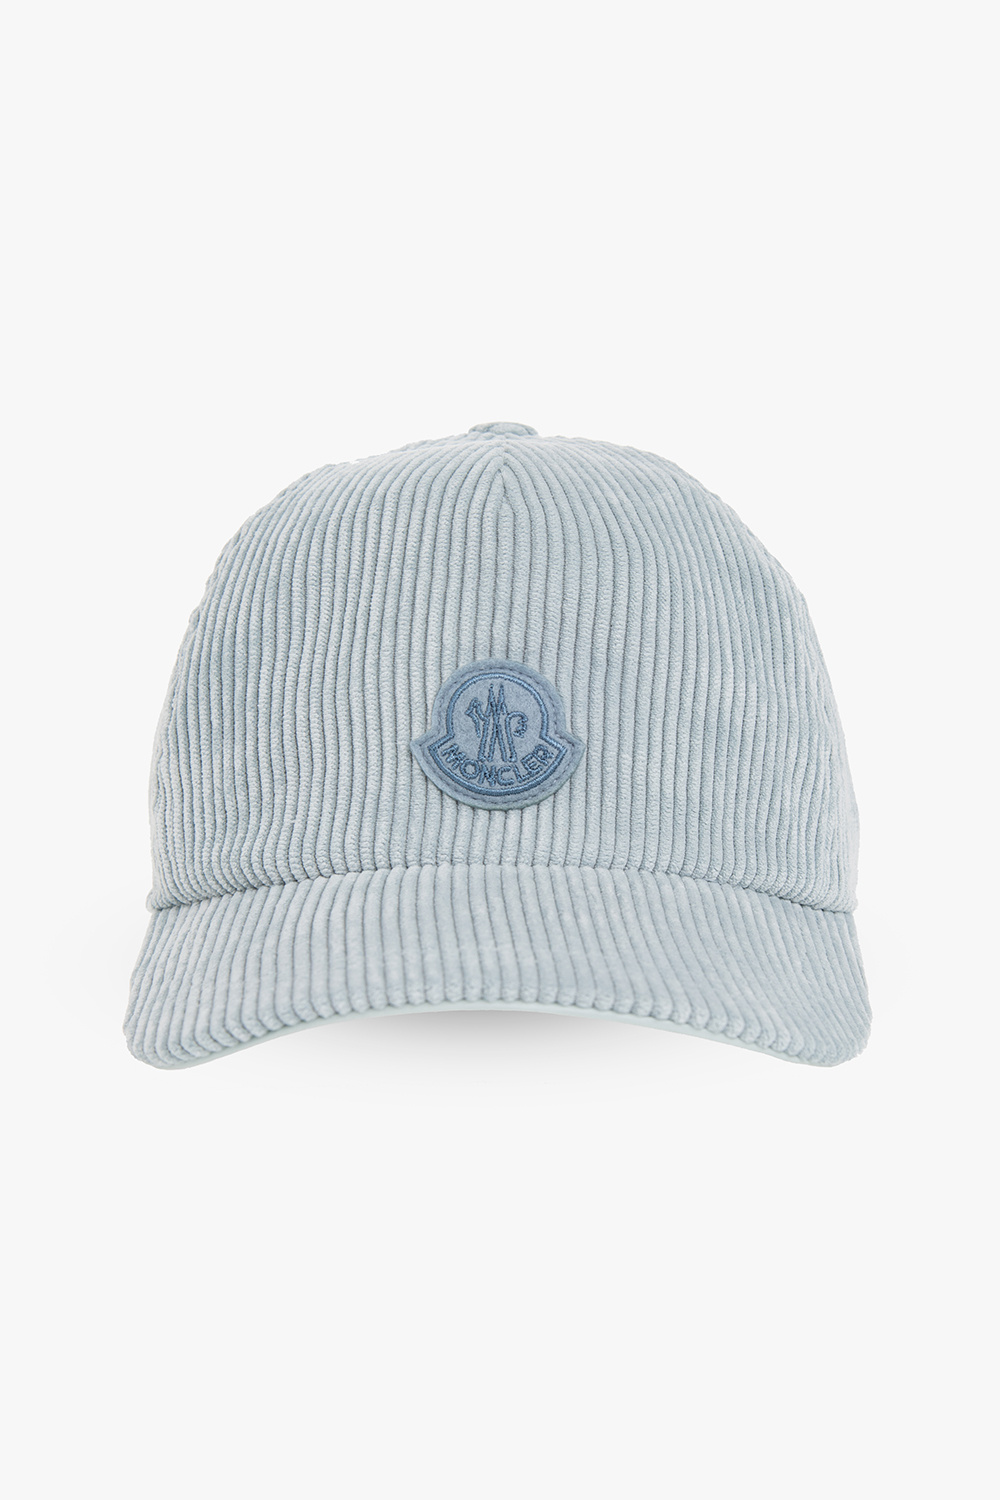 Moncler A-COLD-WALL logo-patch detail hat